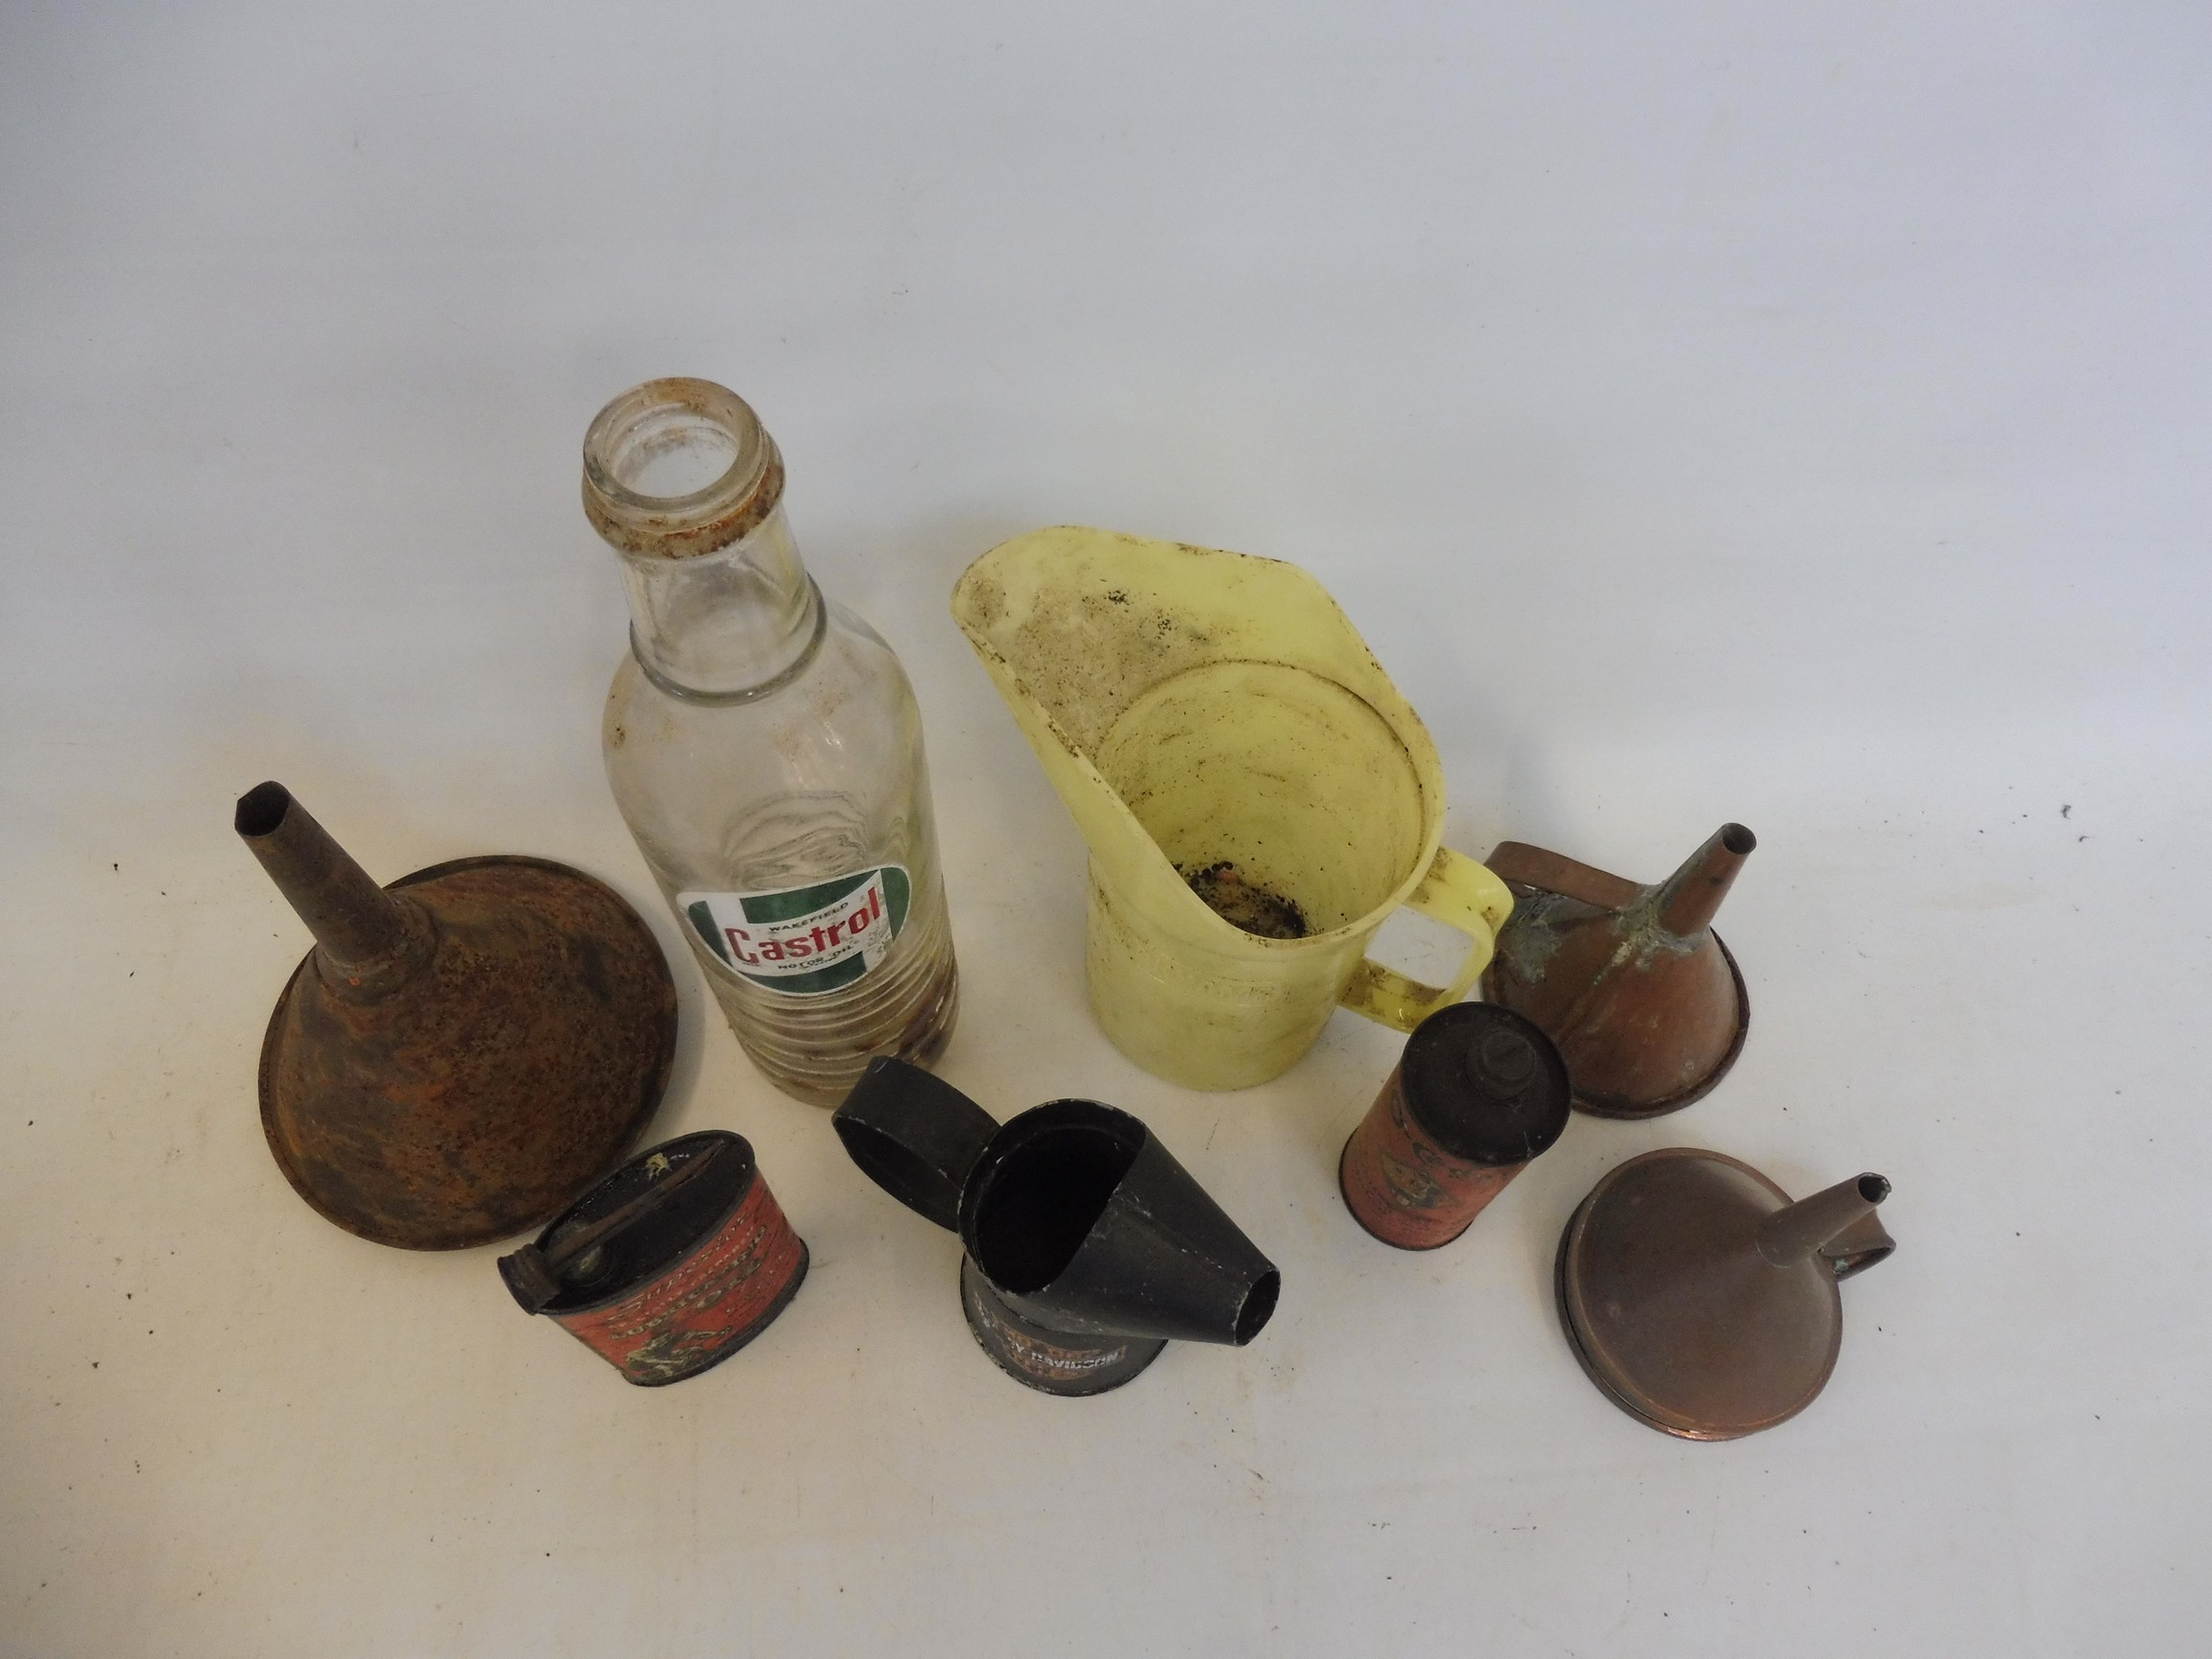 A Wakefield Castrol quart glass bottle and various oil cans, funnels and measures. - Image 2 of 2